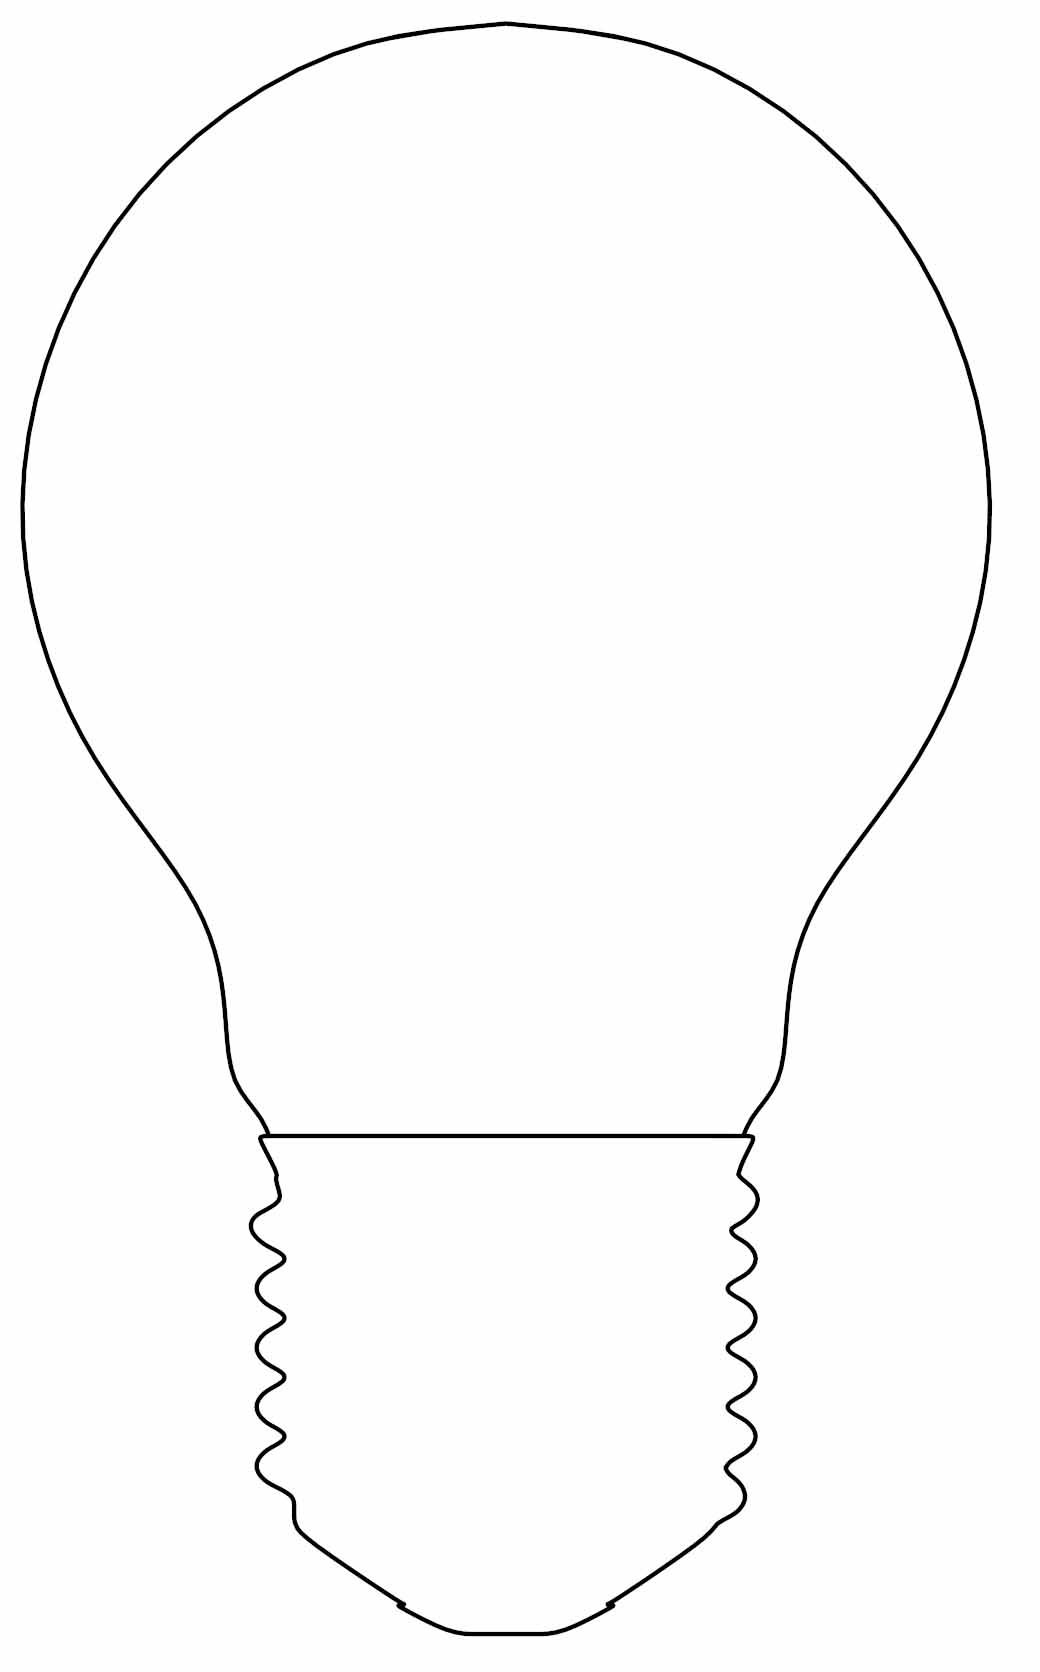 Excellent Image Of Light Bulb Coloring Page Entitlementtrap Light Bulb Printable Coloring Pages Light Bulb Template